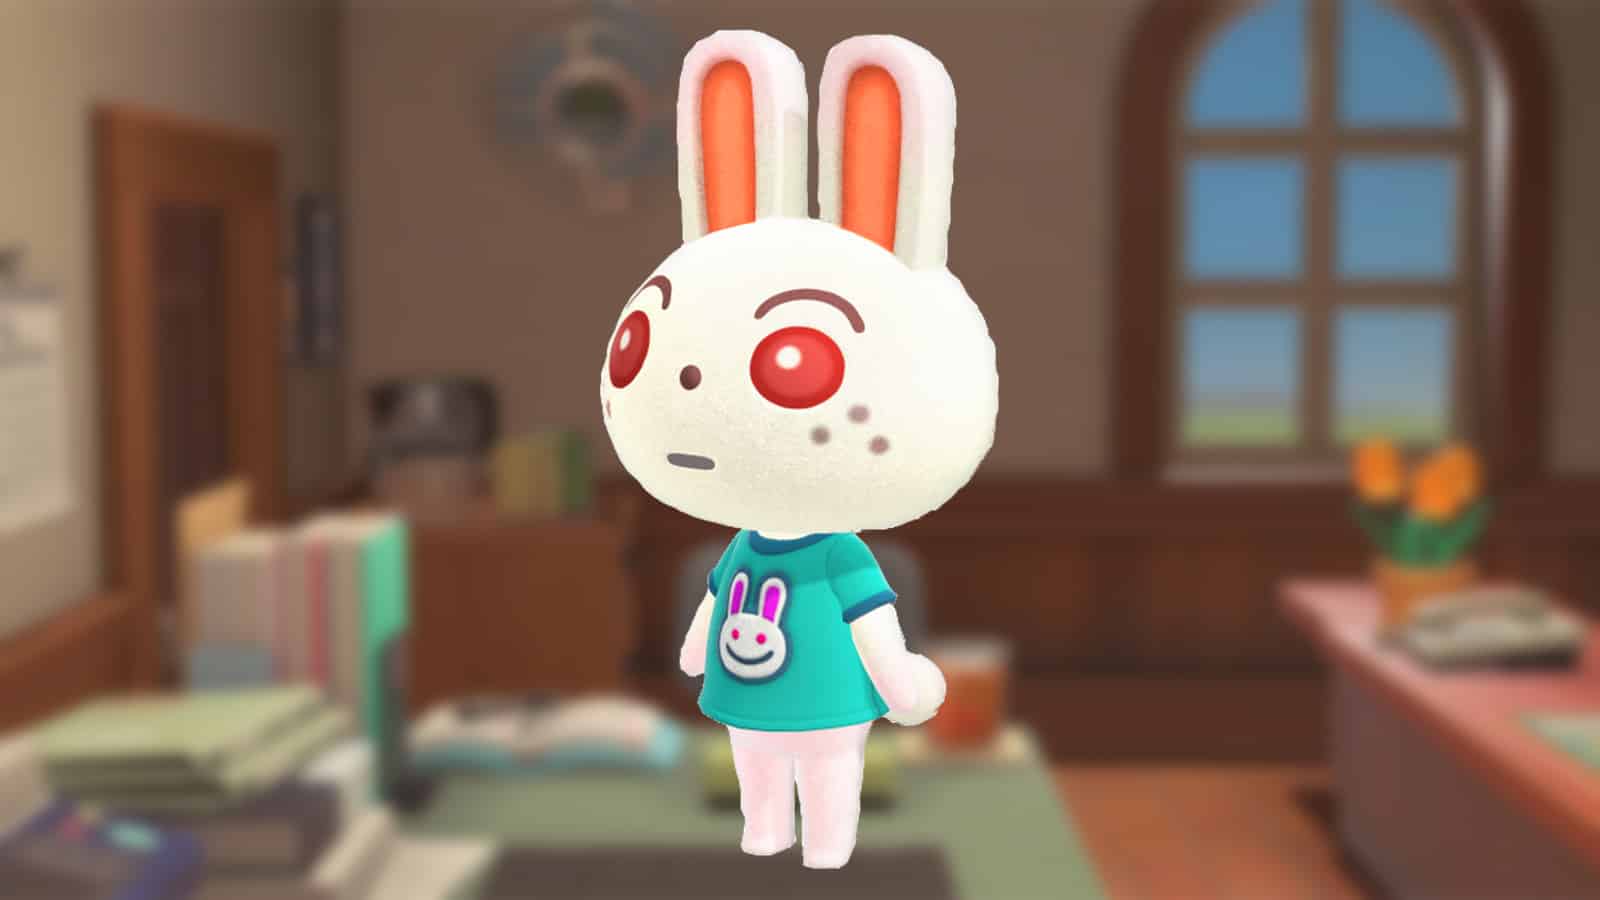 Ruby appearing in Animal Crossing New Horizons